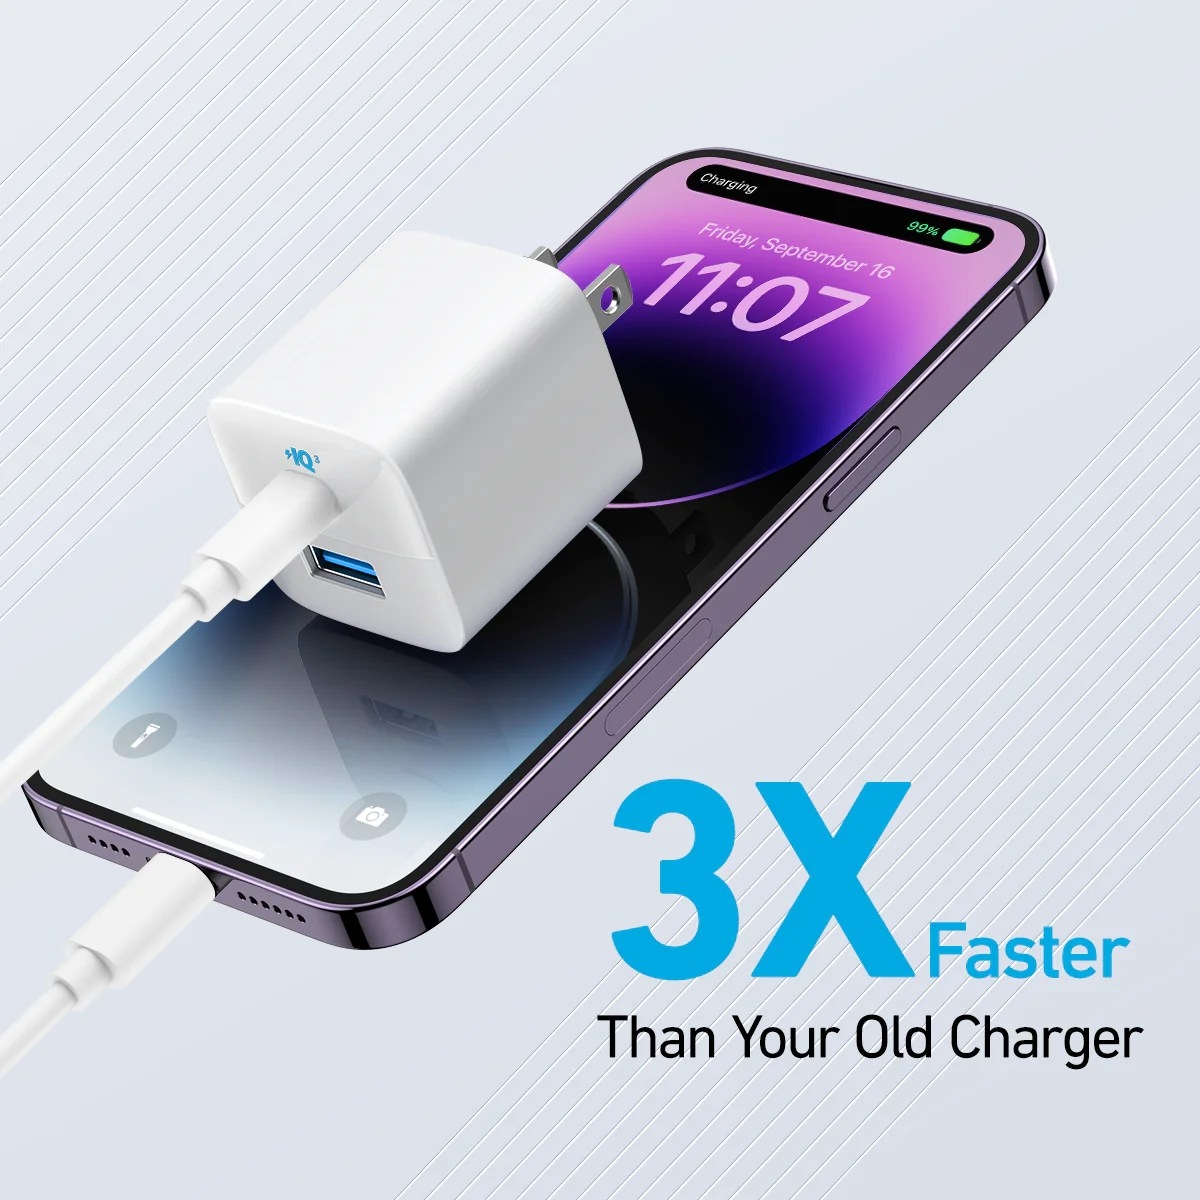 Anker 323 PD Charger 33W